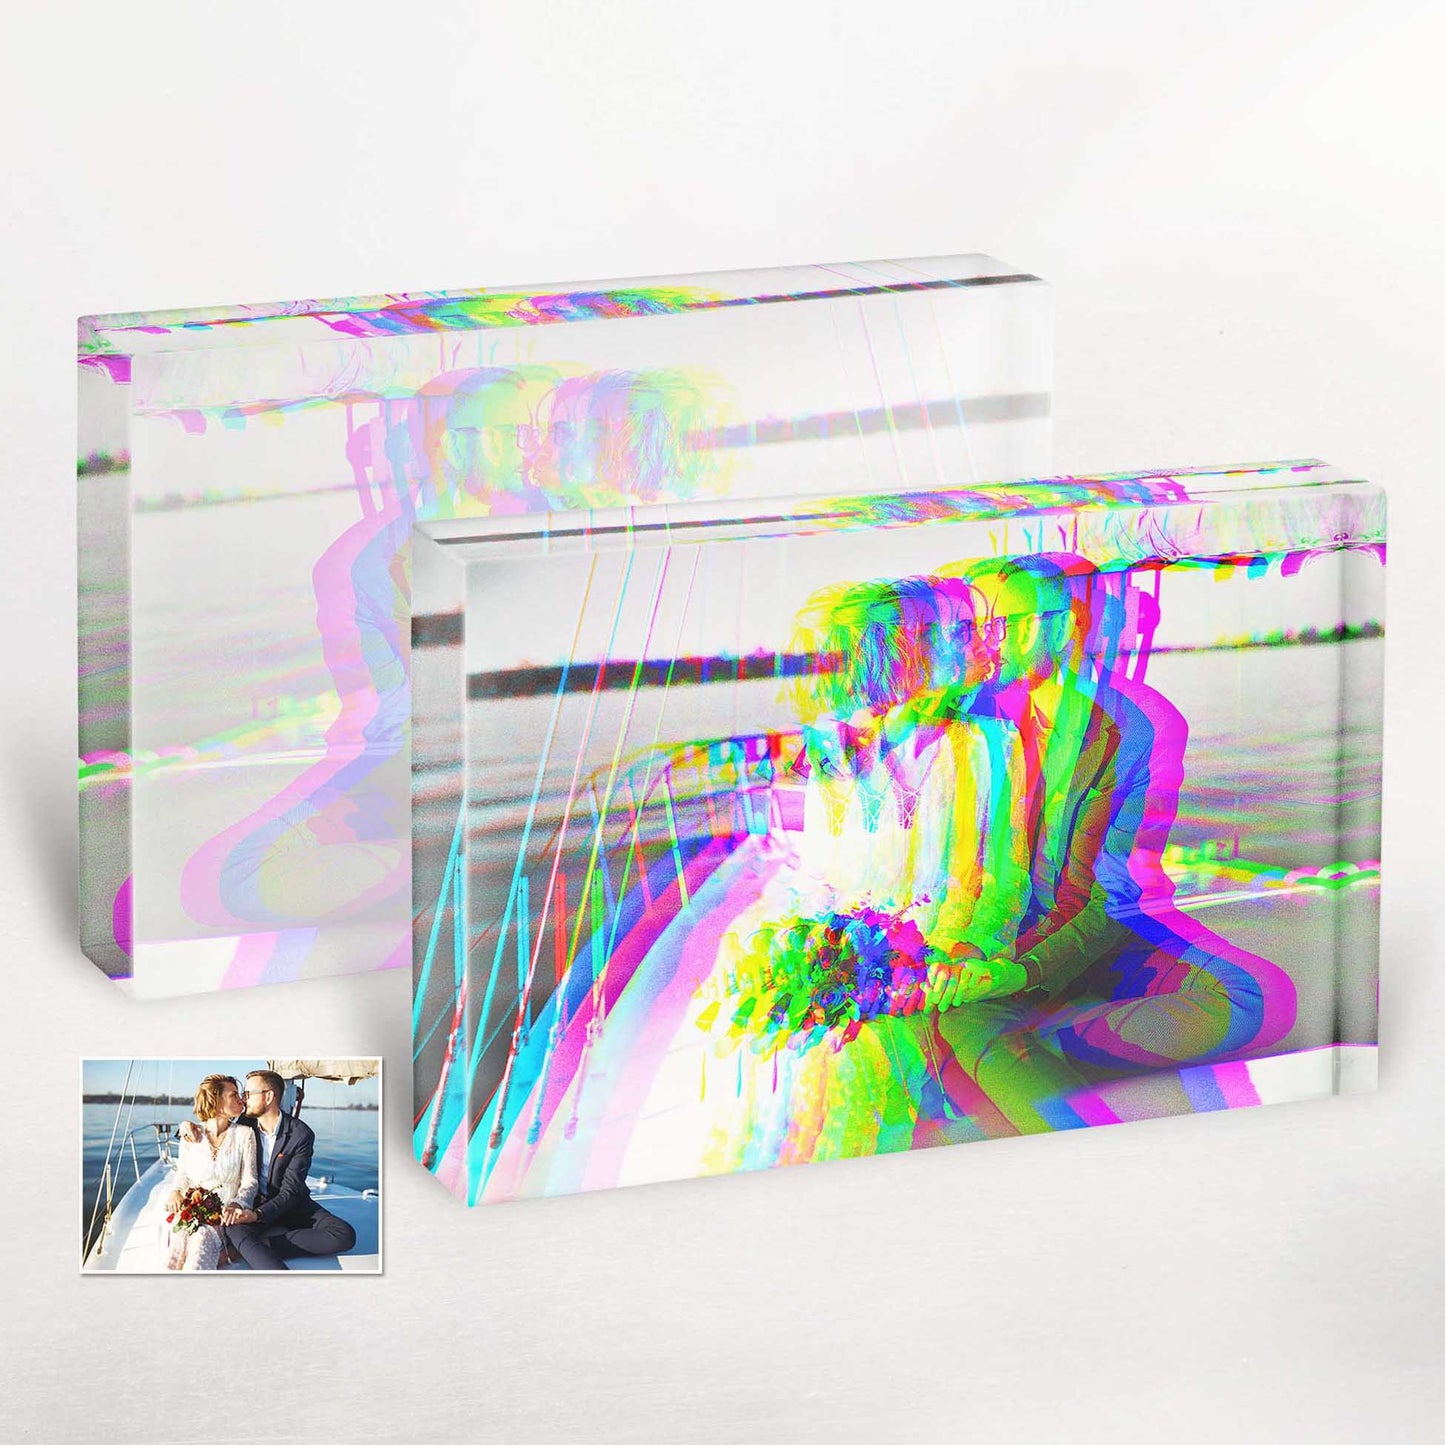 Turn your favorite photographs into a captivating 3D display with our Personalized Anaglyph 3D Effect Acrylic Block Photo. Its eye-catching design creates an illusion of depth, making your images come to life